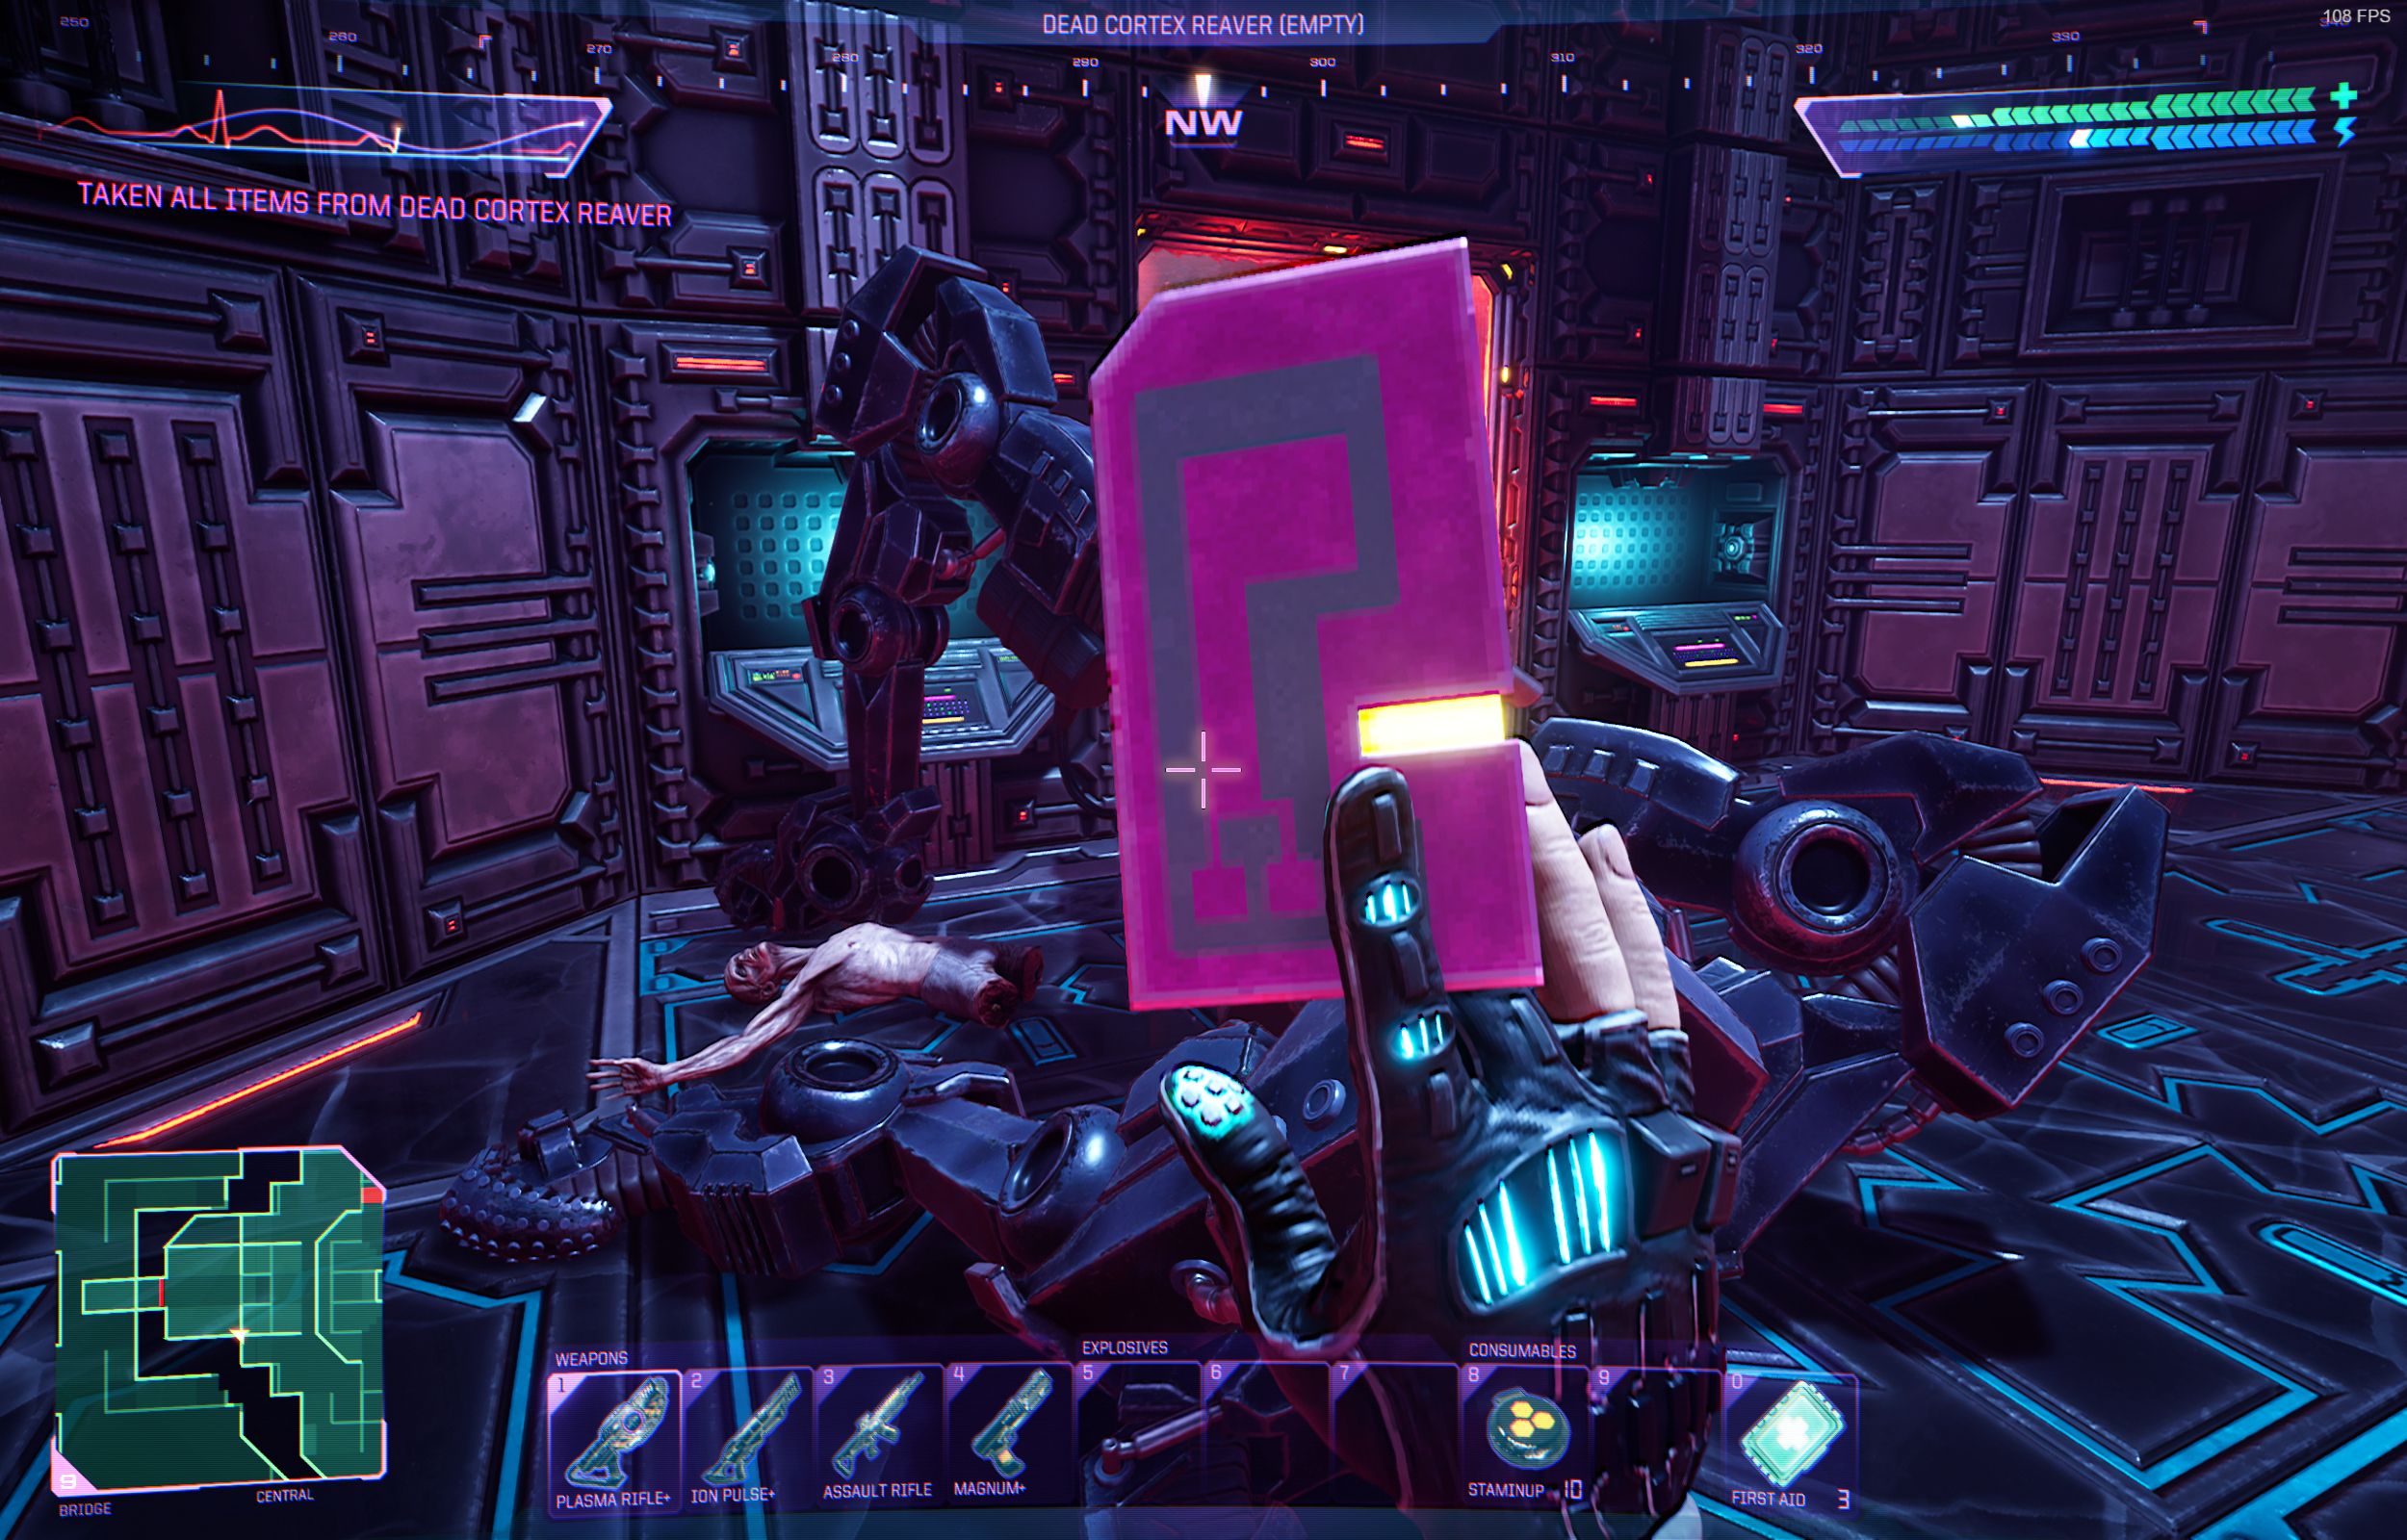 System Shock_ Command Access Card dropped by Cortex Reaver